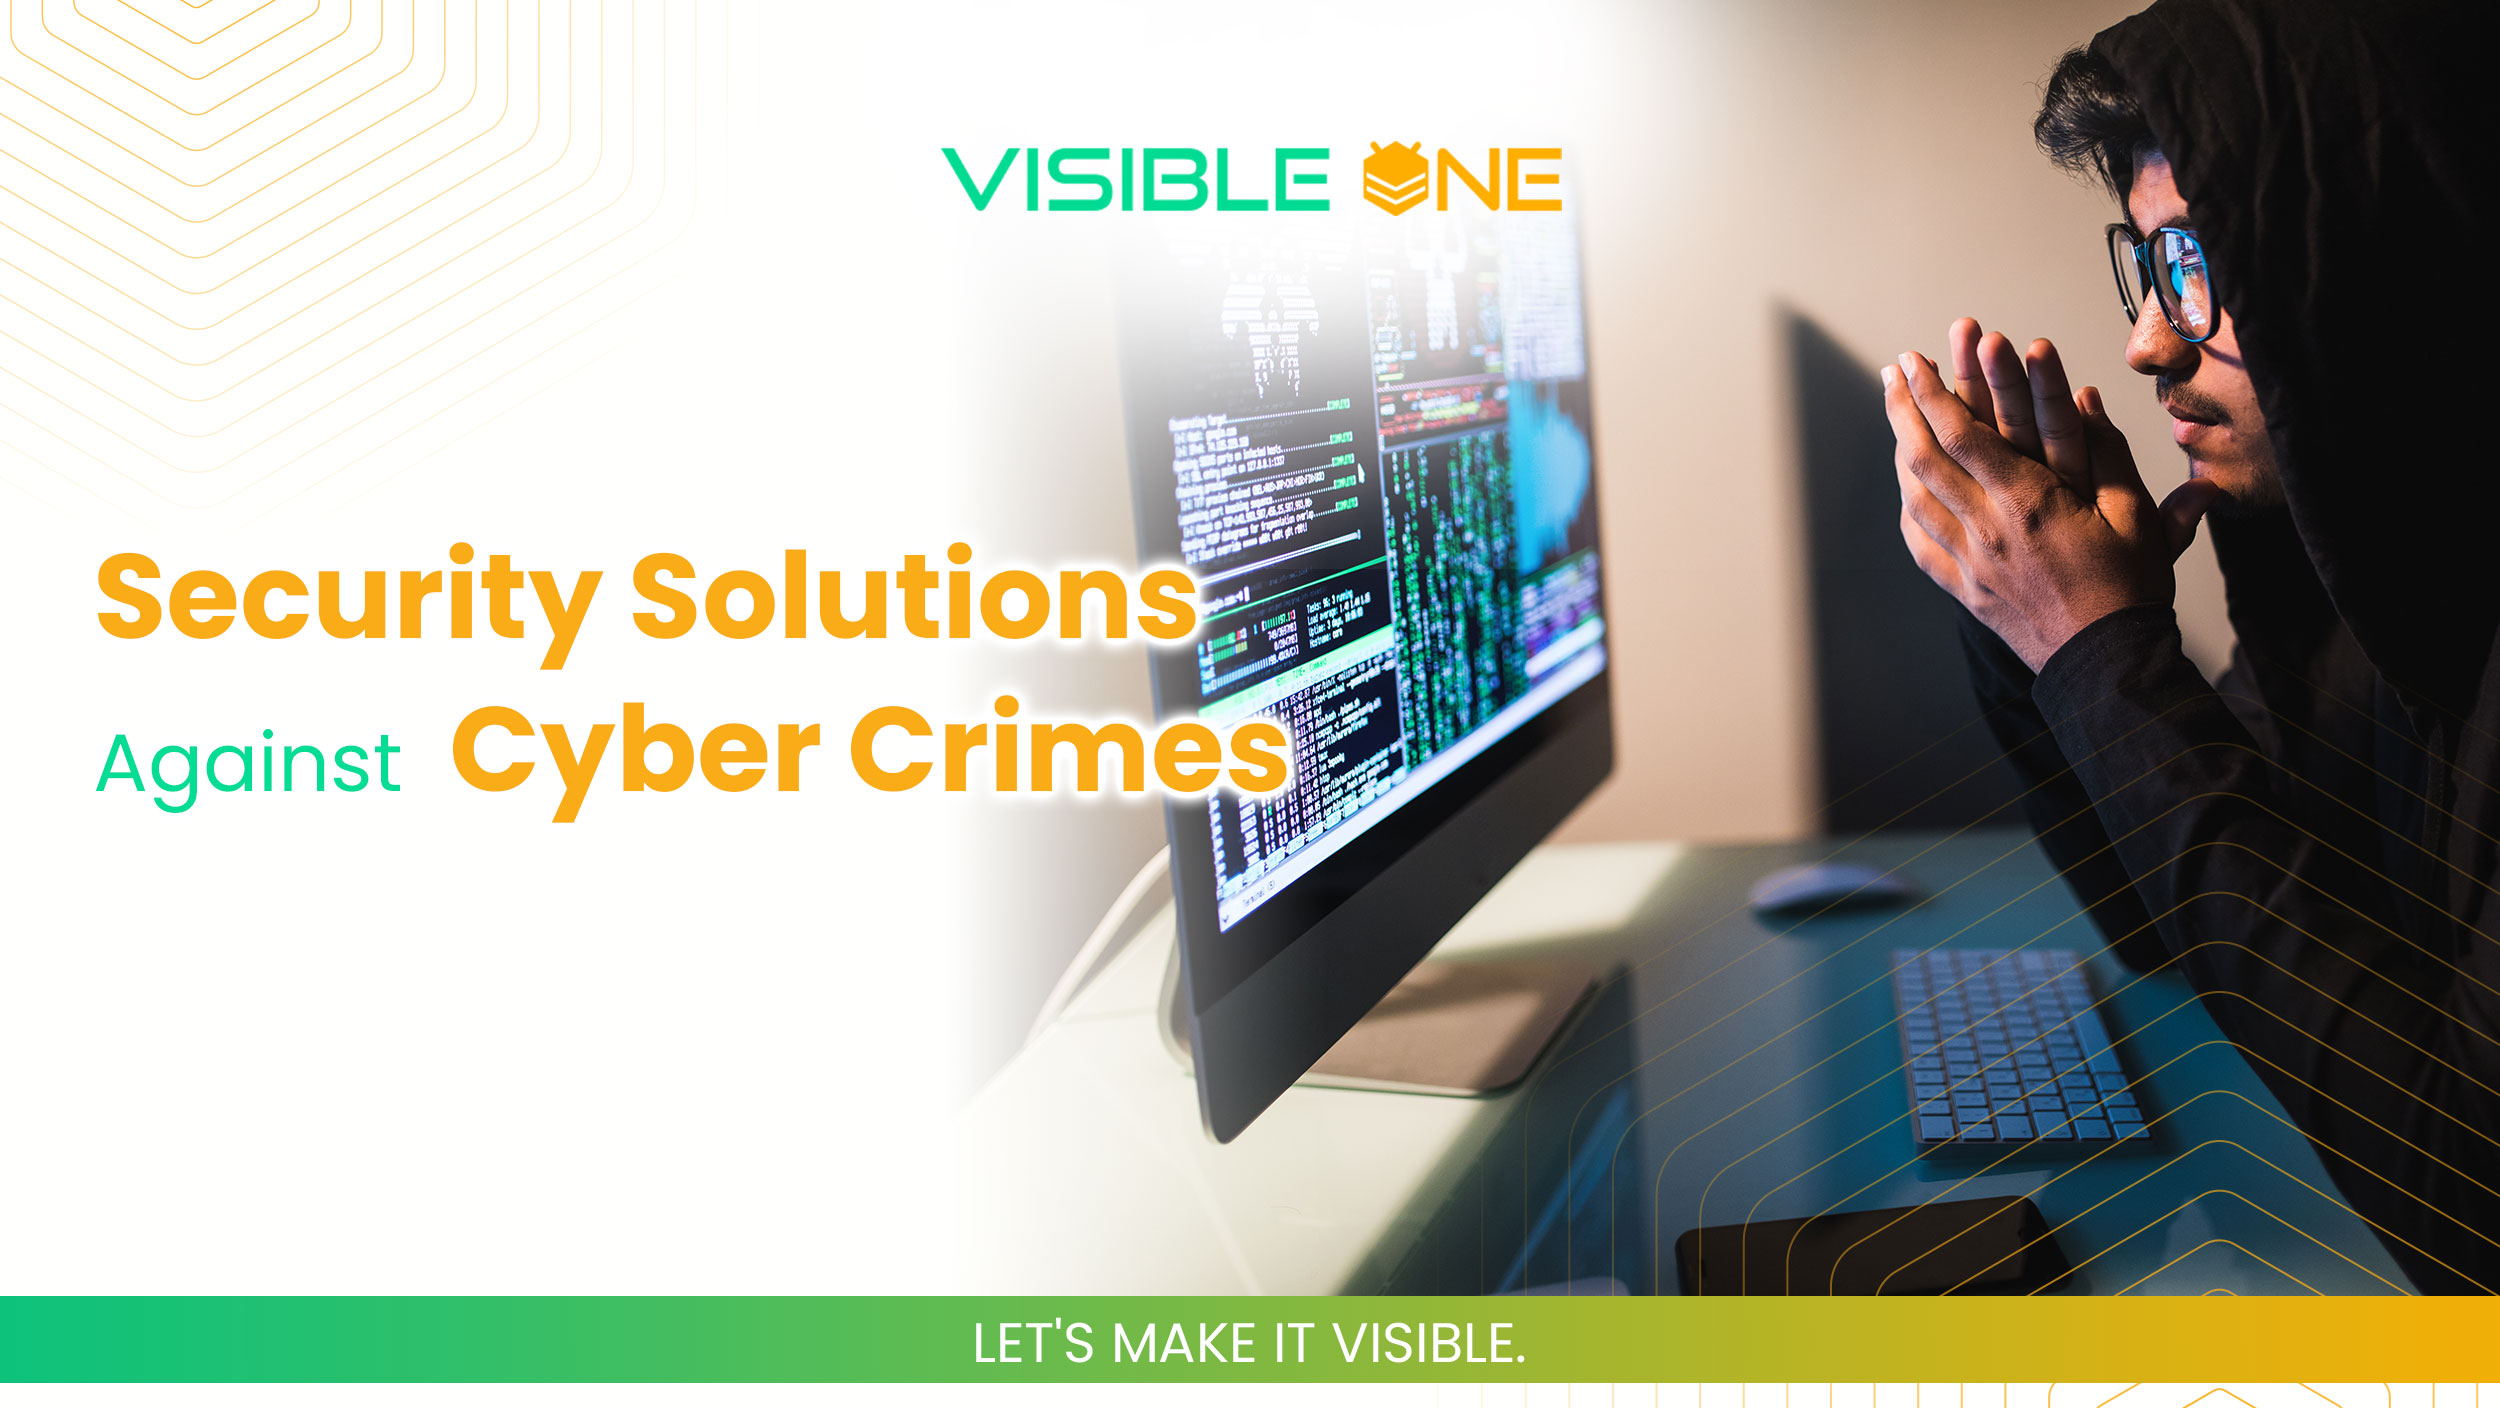 Security Solutions Against Cyber Crimes